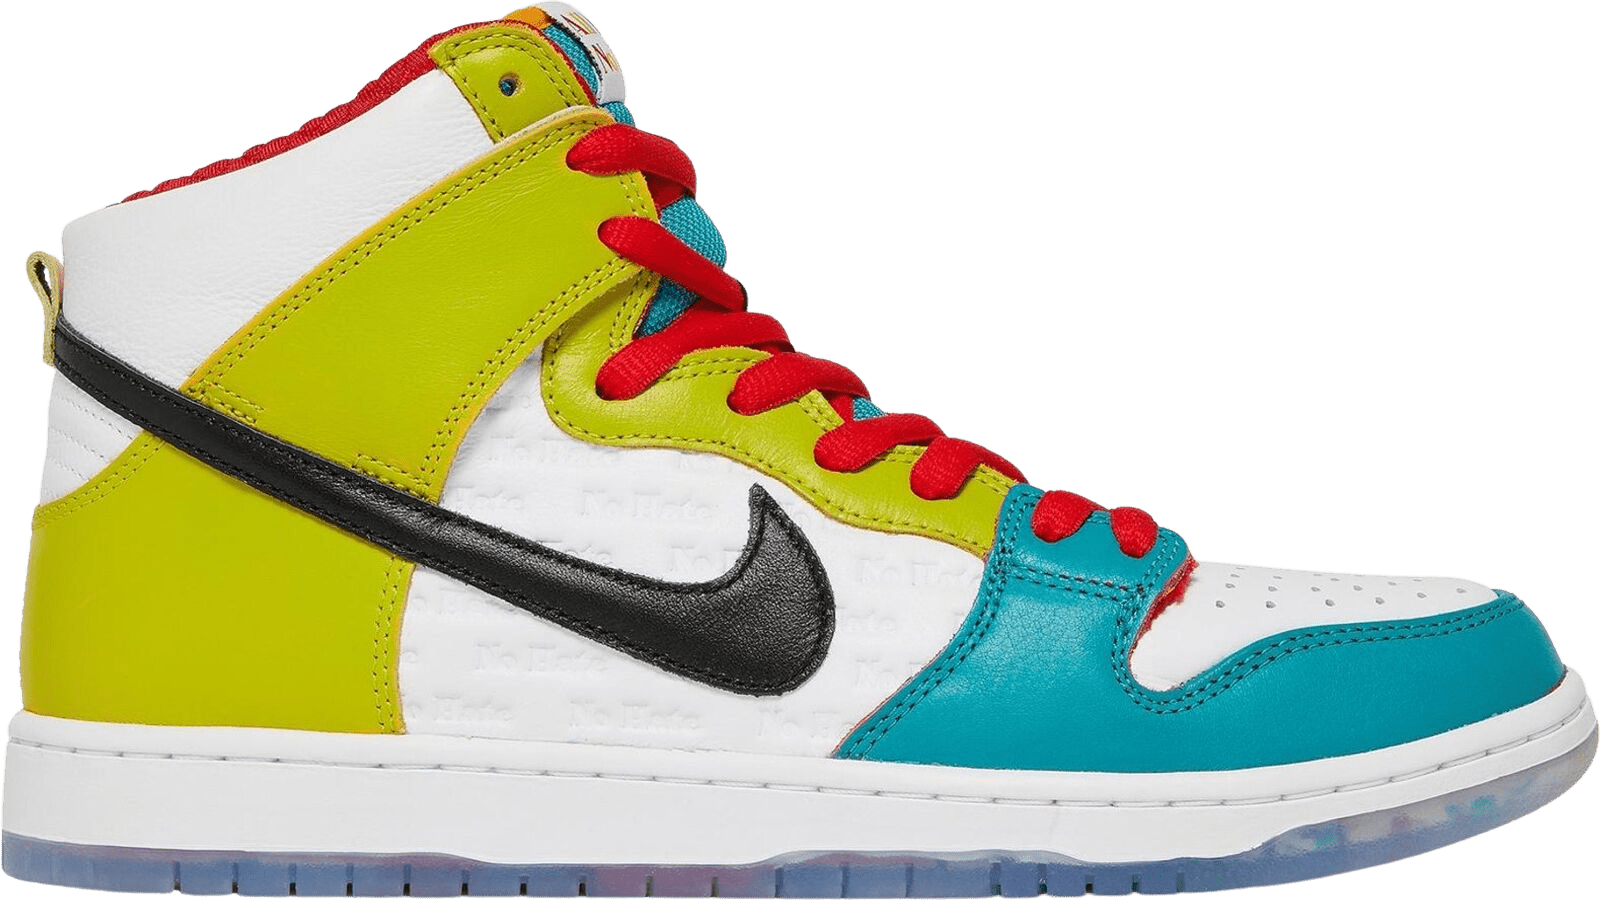 Everything You Want to Know About the Nike Dunk Sneakers | eBay